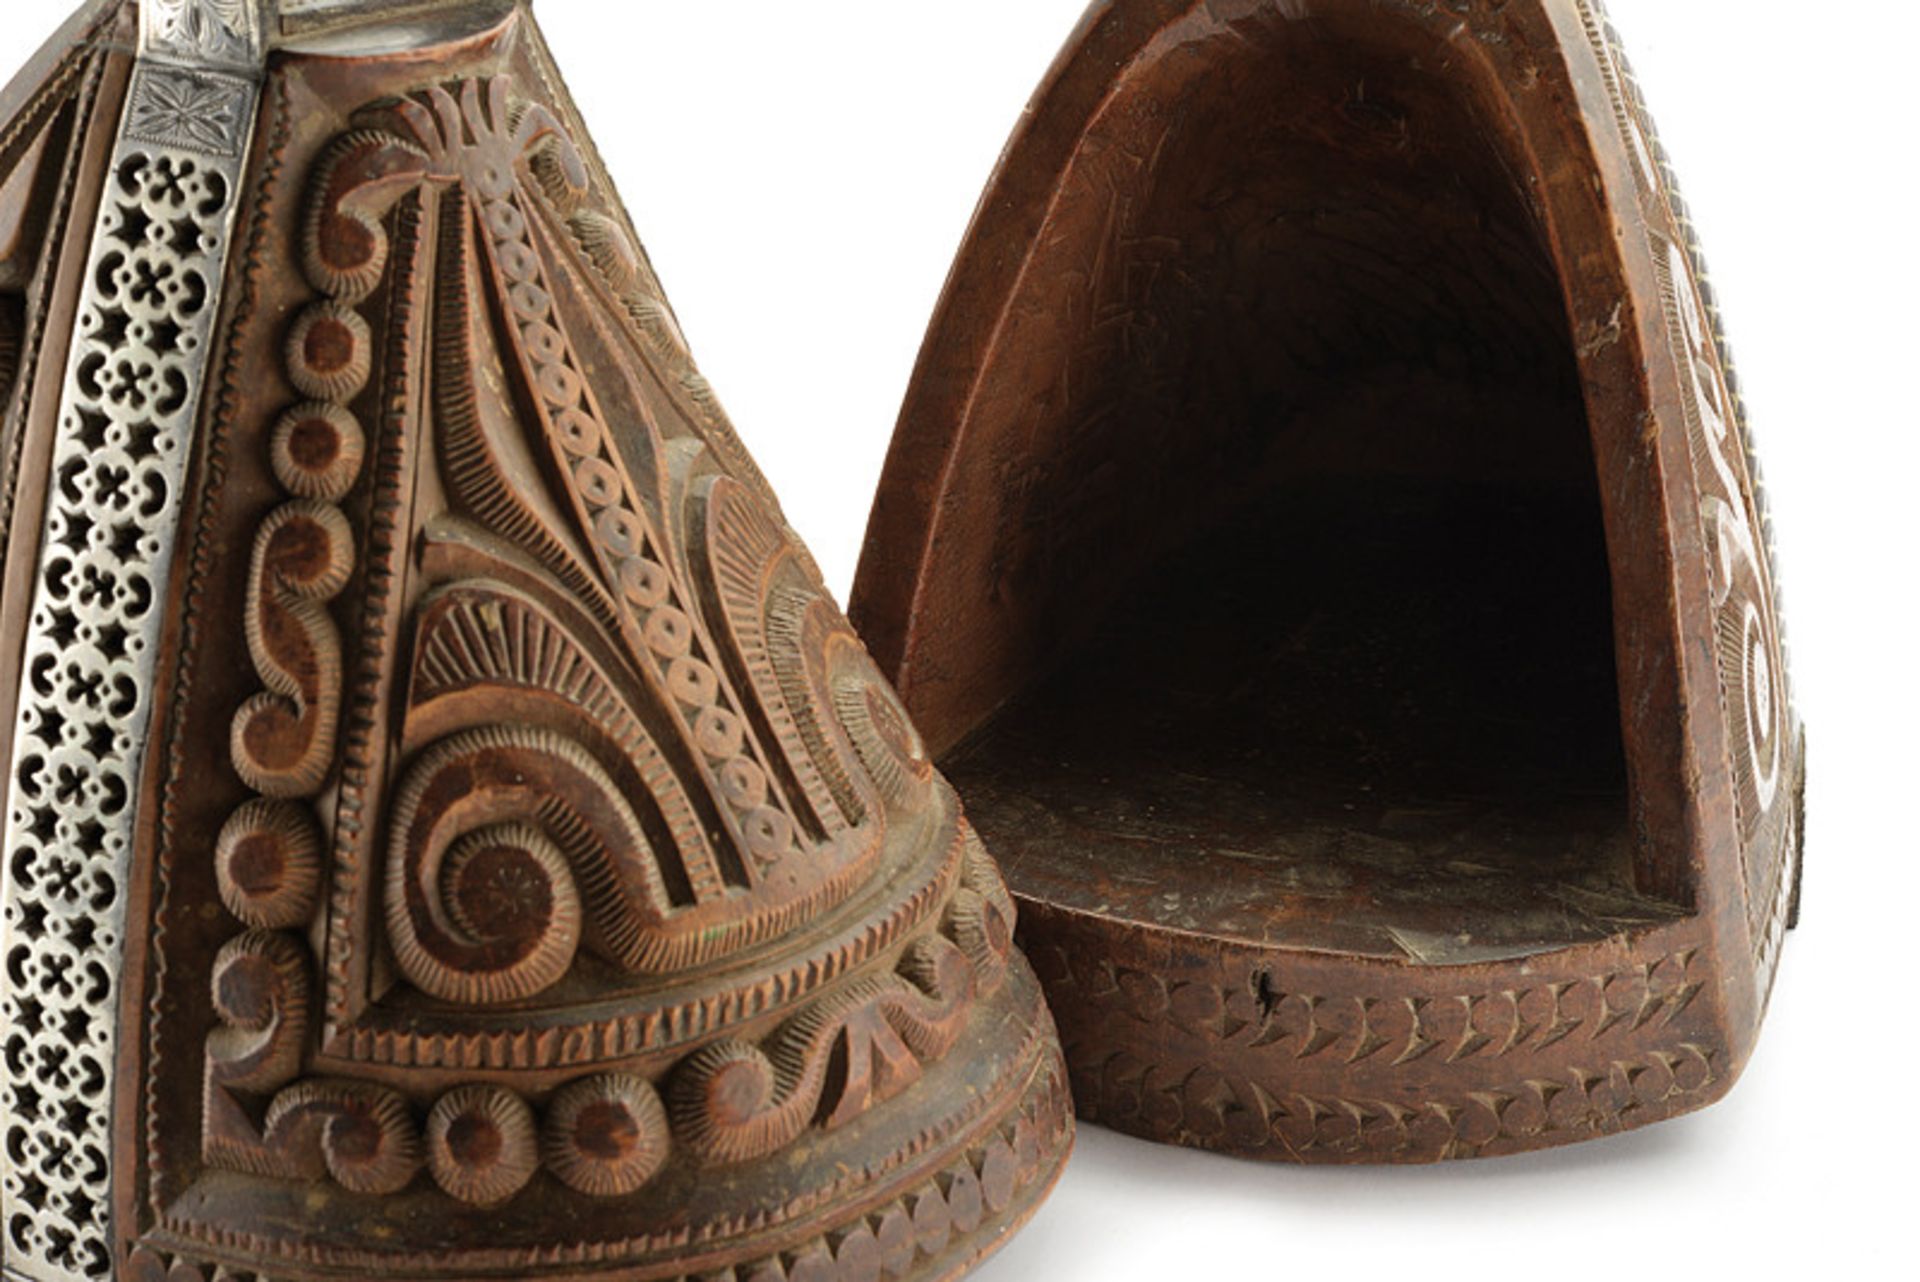 An interesting pair of stirrups dating: 19th Century provenance: Chile Large, wooden structure, - Image 3 of 4